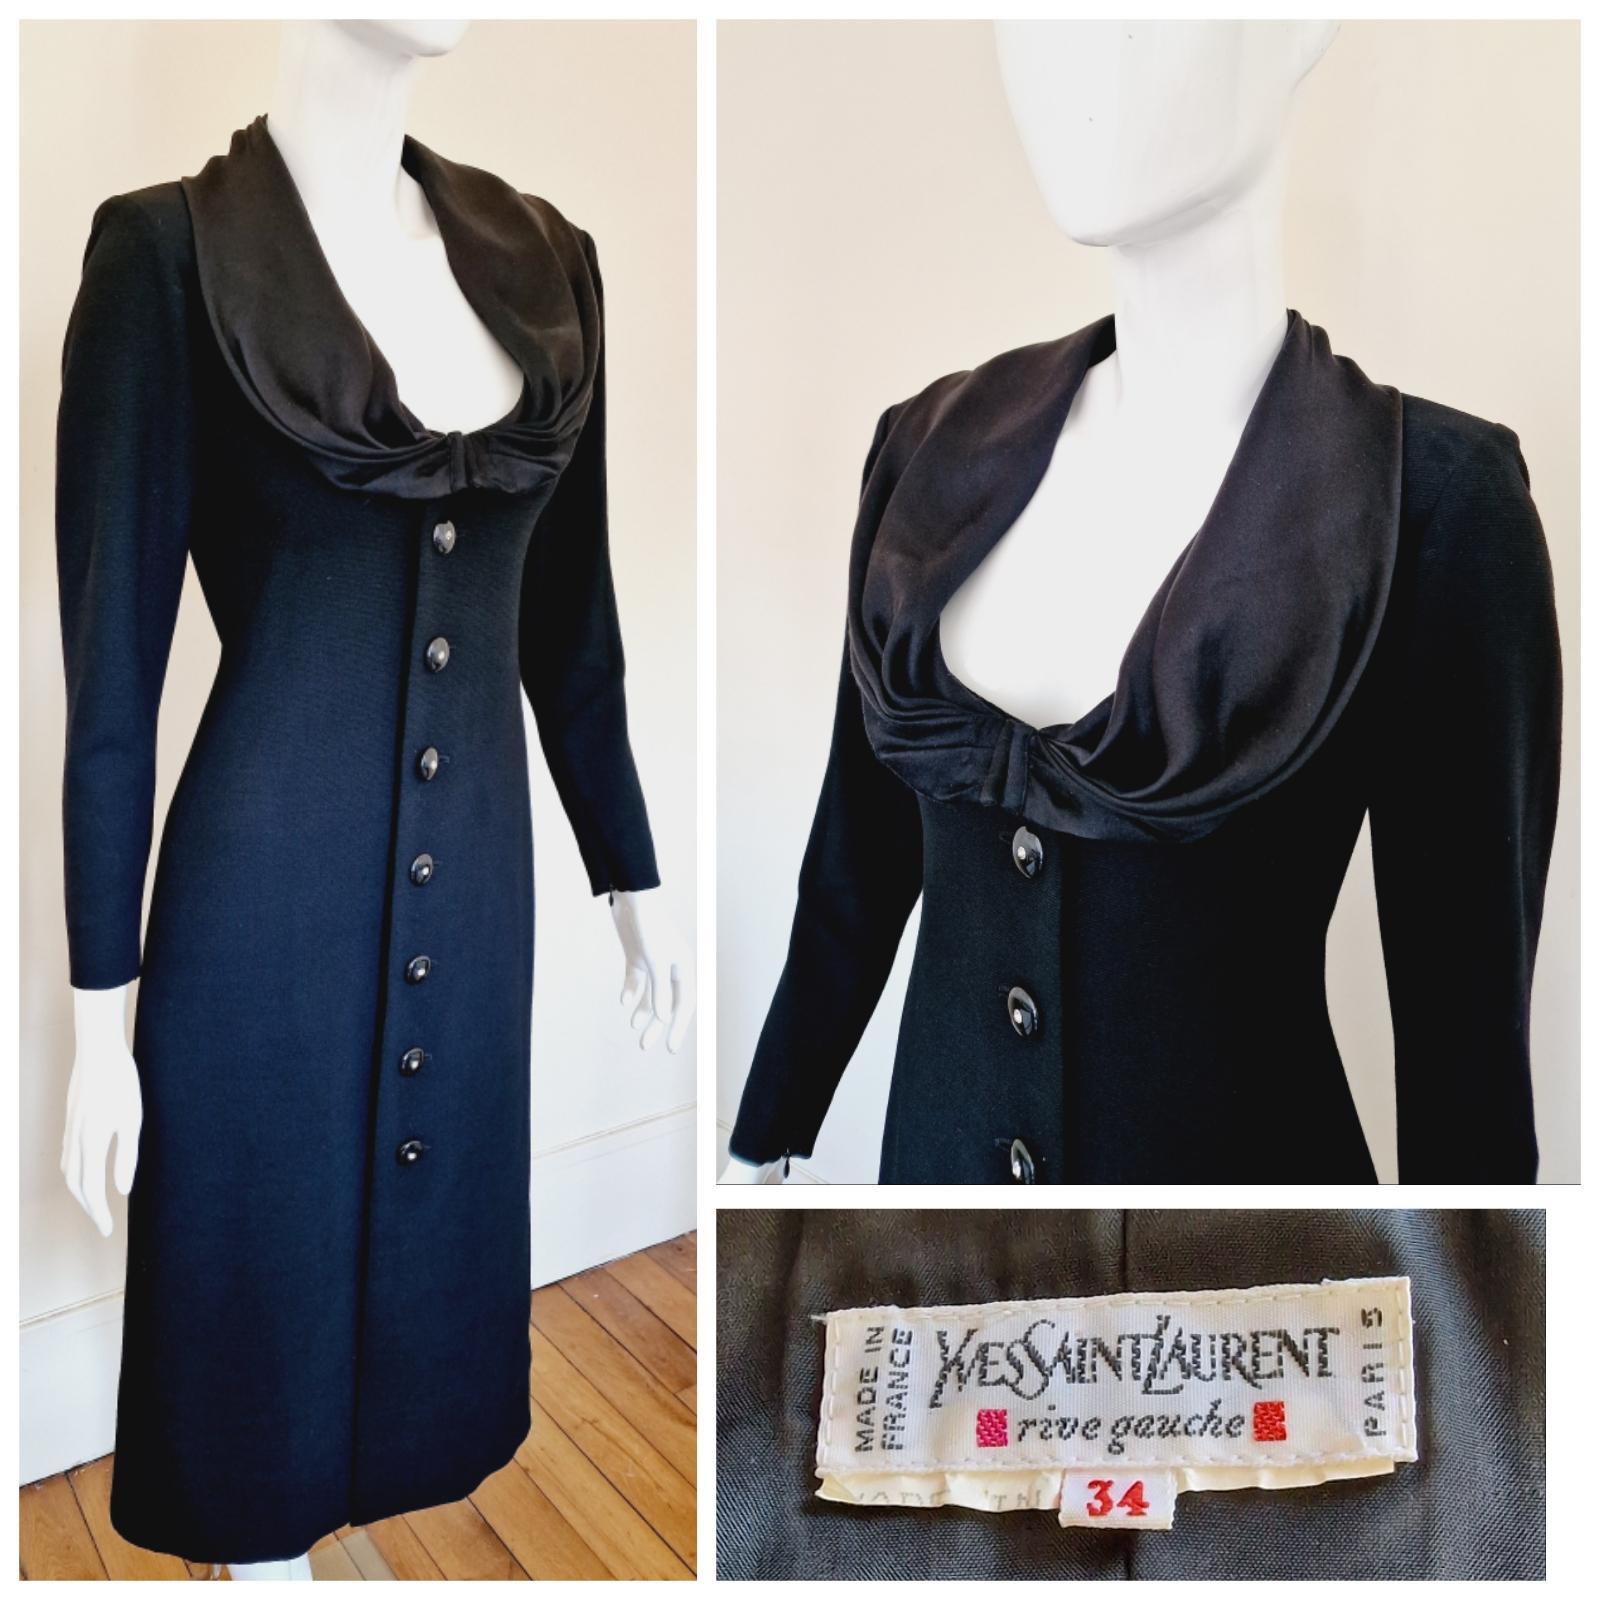 Evening dress / coat by Yves Saint Laurent!
Wonderful silhouette!
With shoulder pads!
Black & diamond look bottons!
Zipper at the sleeves.
You can wear it as a dress or on a light dress as a coat. 

SIZE 
Fits from XS to small.
Marked size: